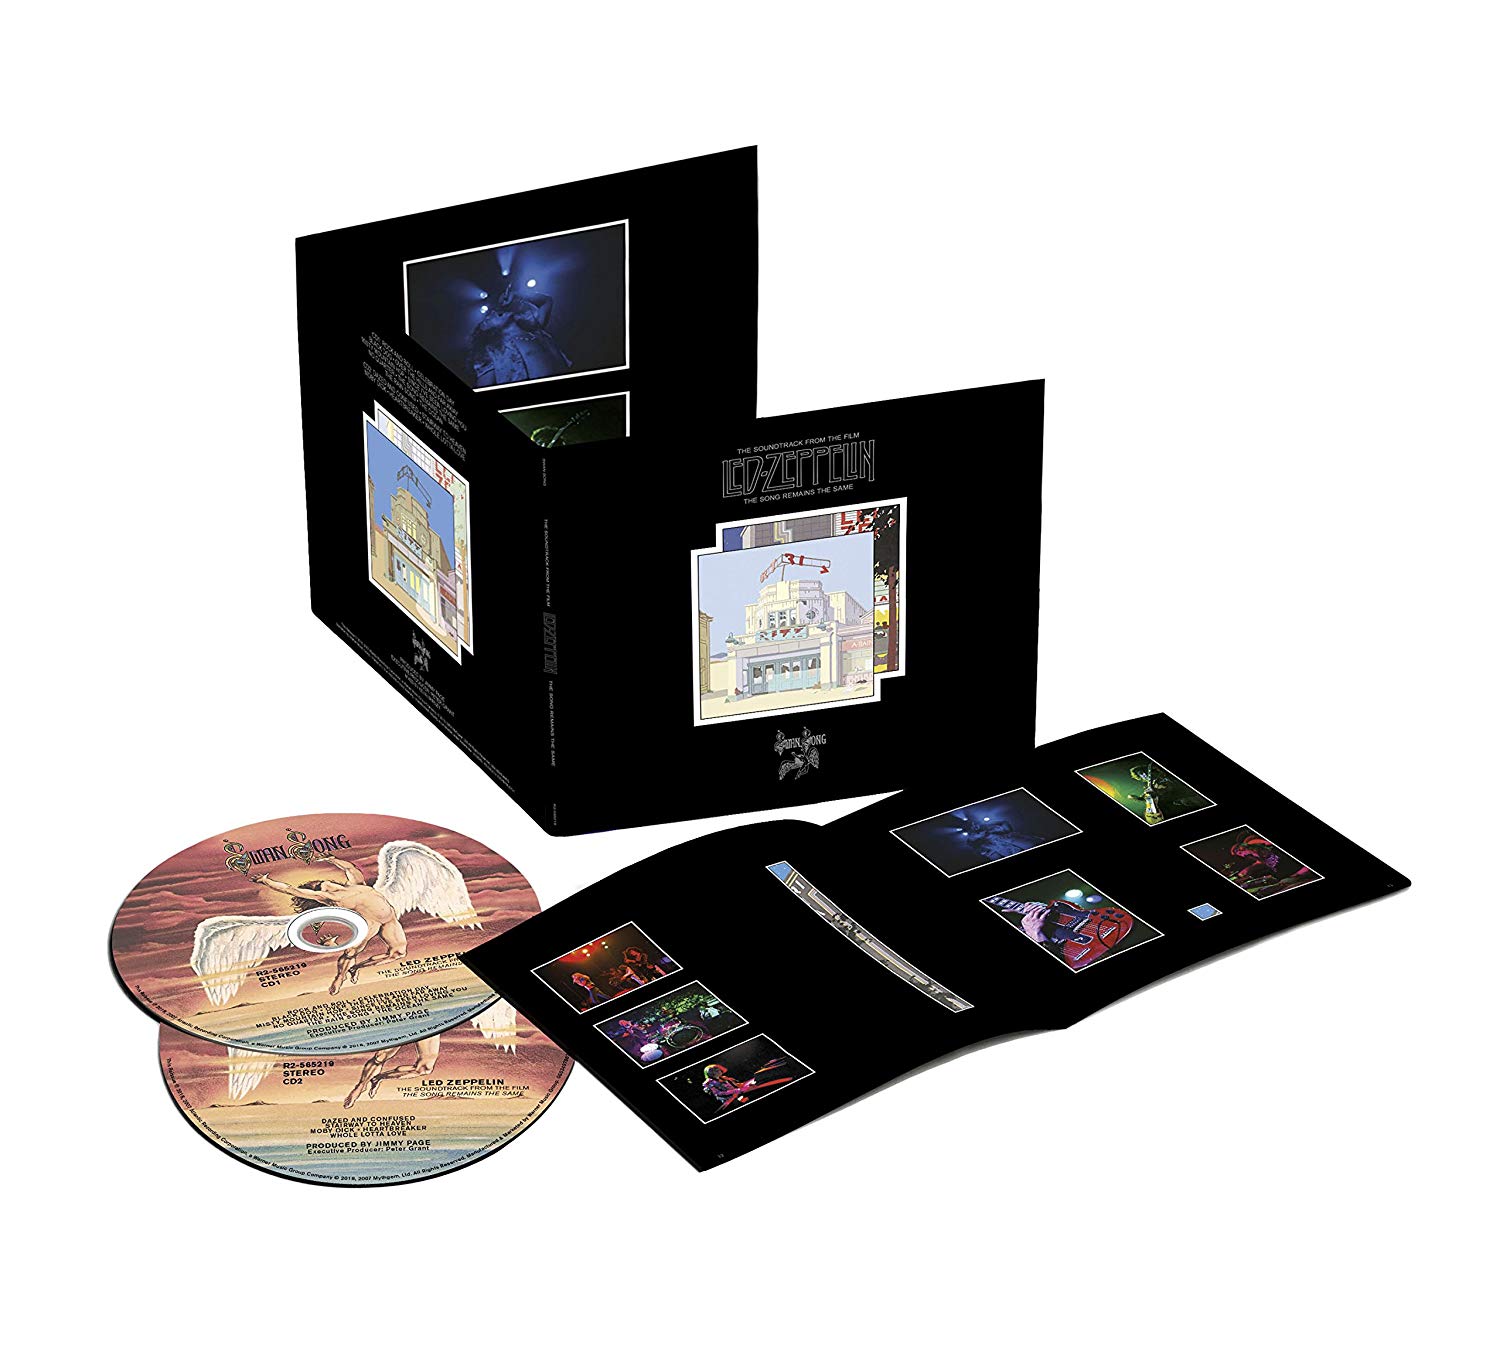 Led Zeppelin - The Song Remains The Same - 1976 (Box Set Atlantic